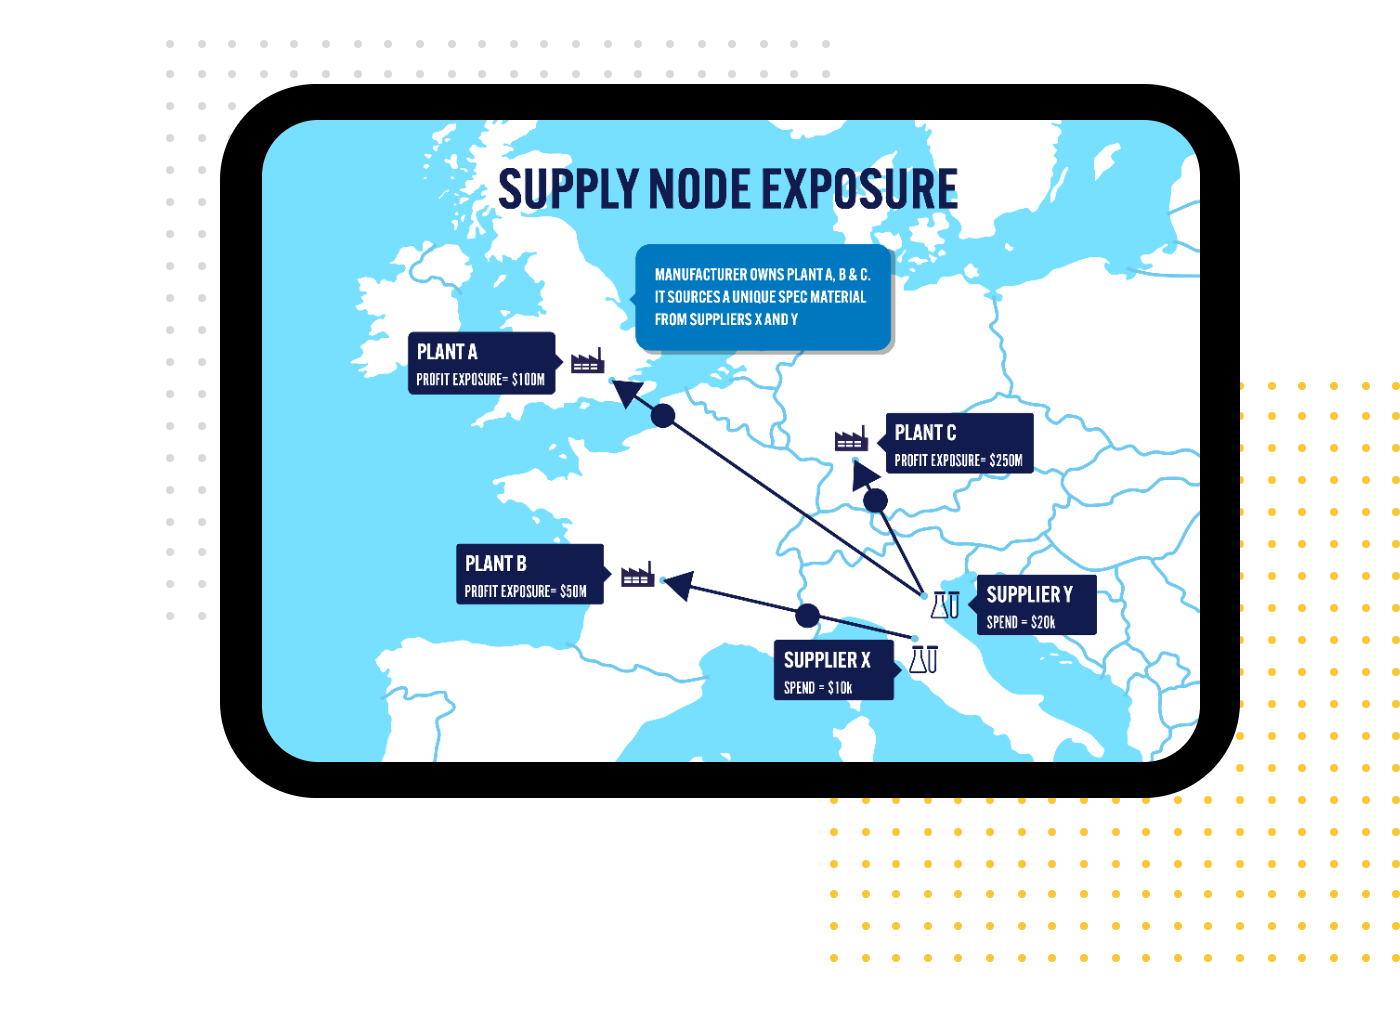 Diagram showing map of Europe titled Supply Node Exposure